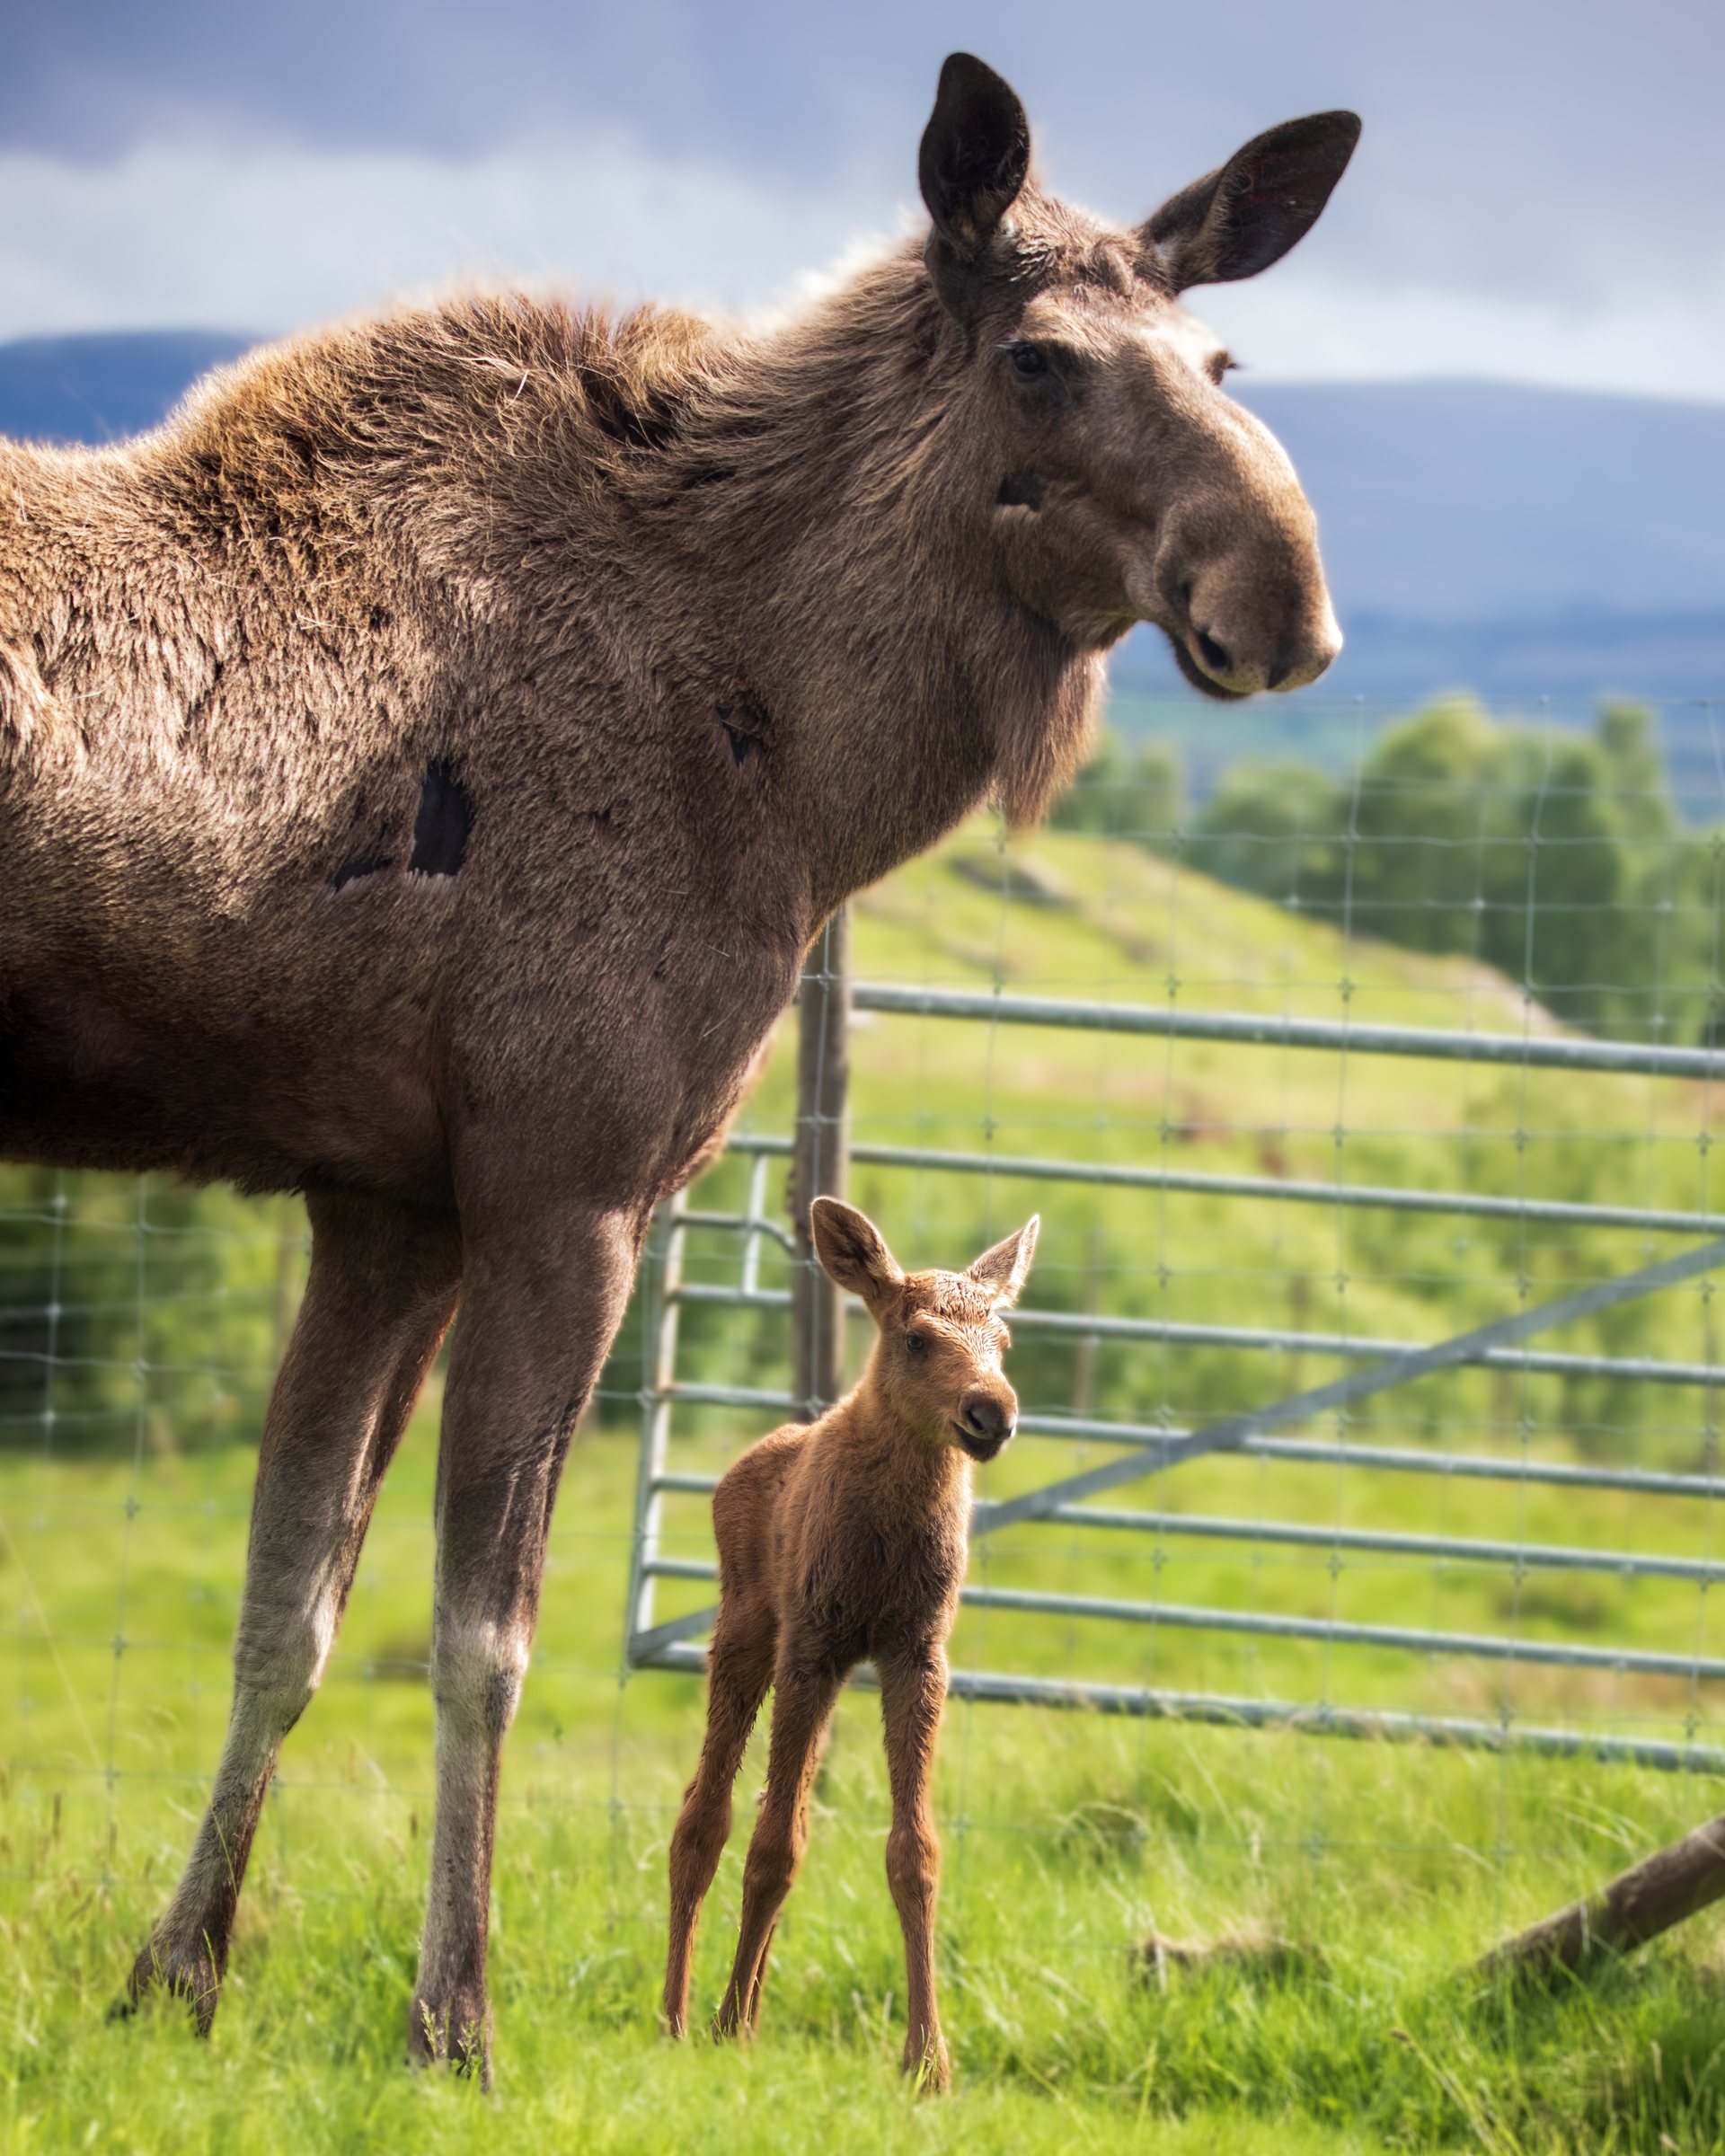 One of the Elk twins born at Highland Wildlife Park.